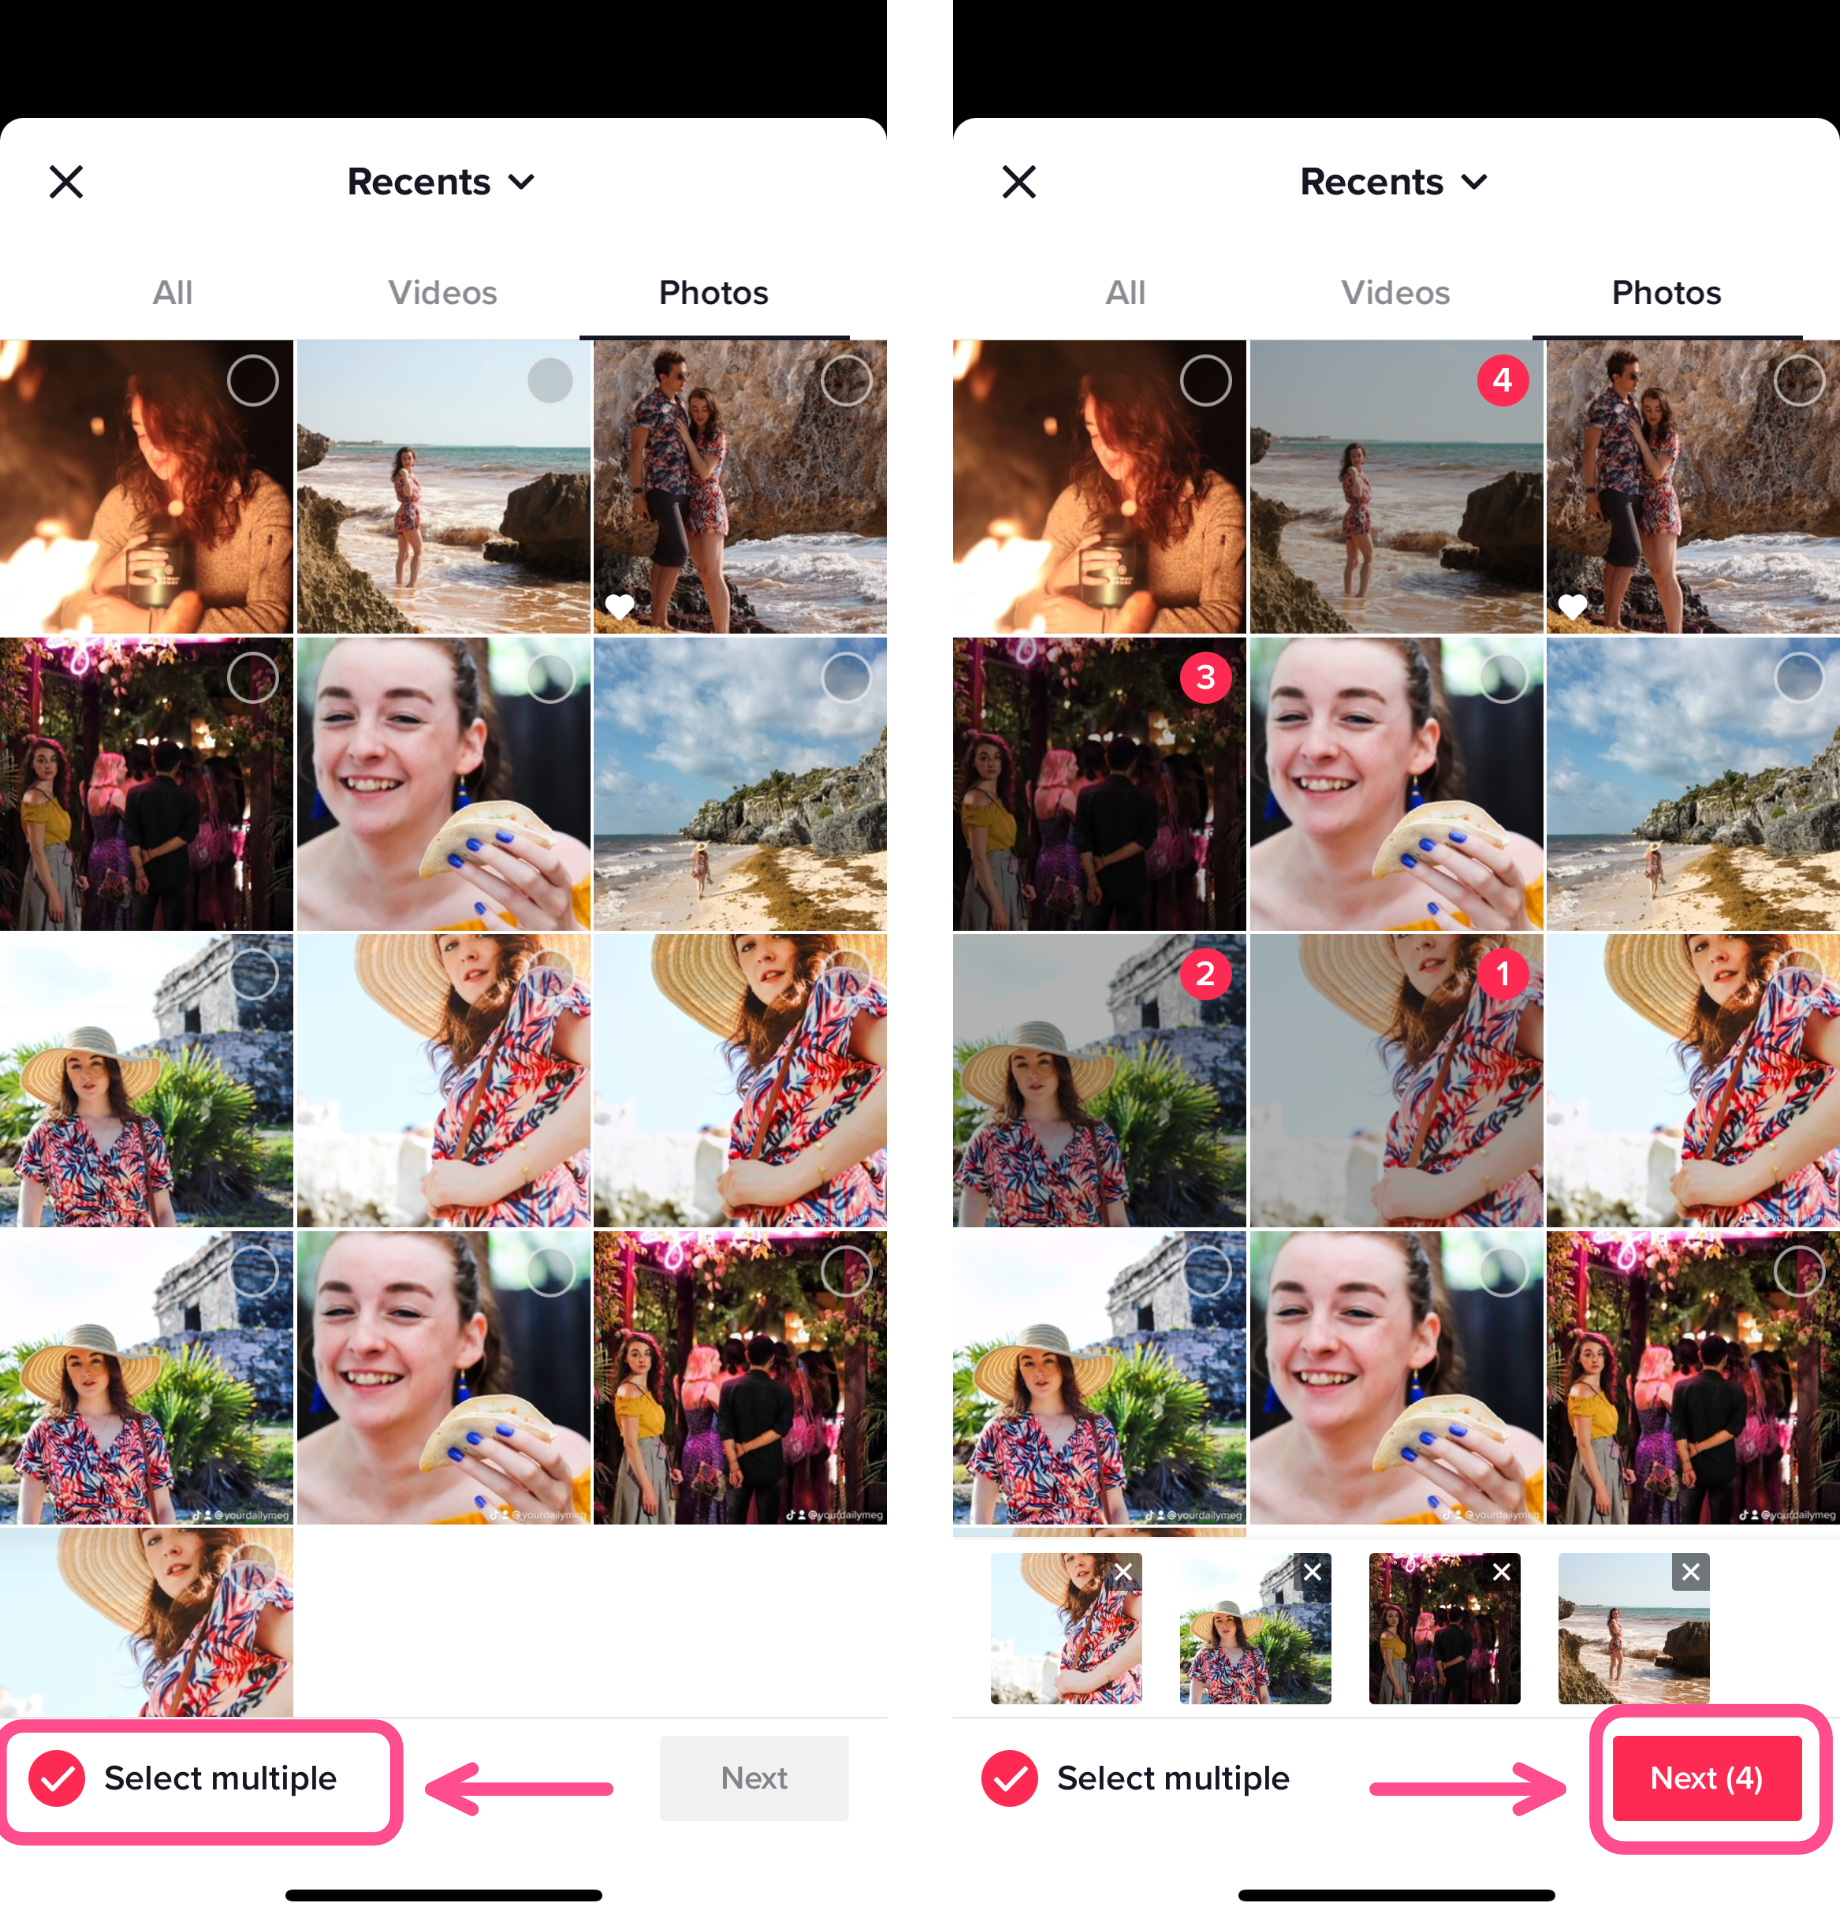 How to Post Photos and Carousels on TikTok with Photo Mode